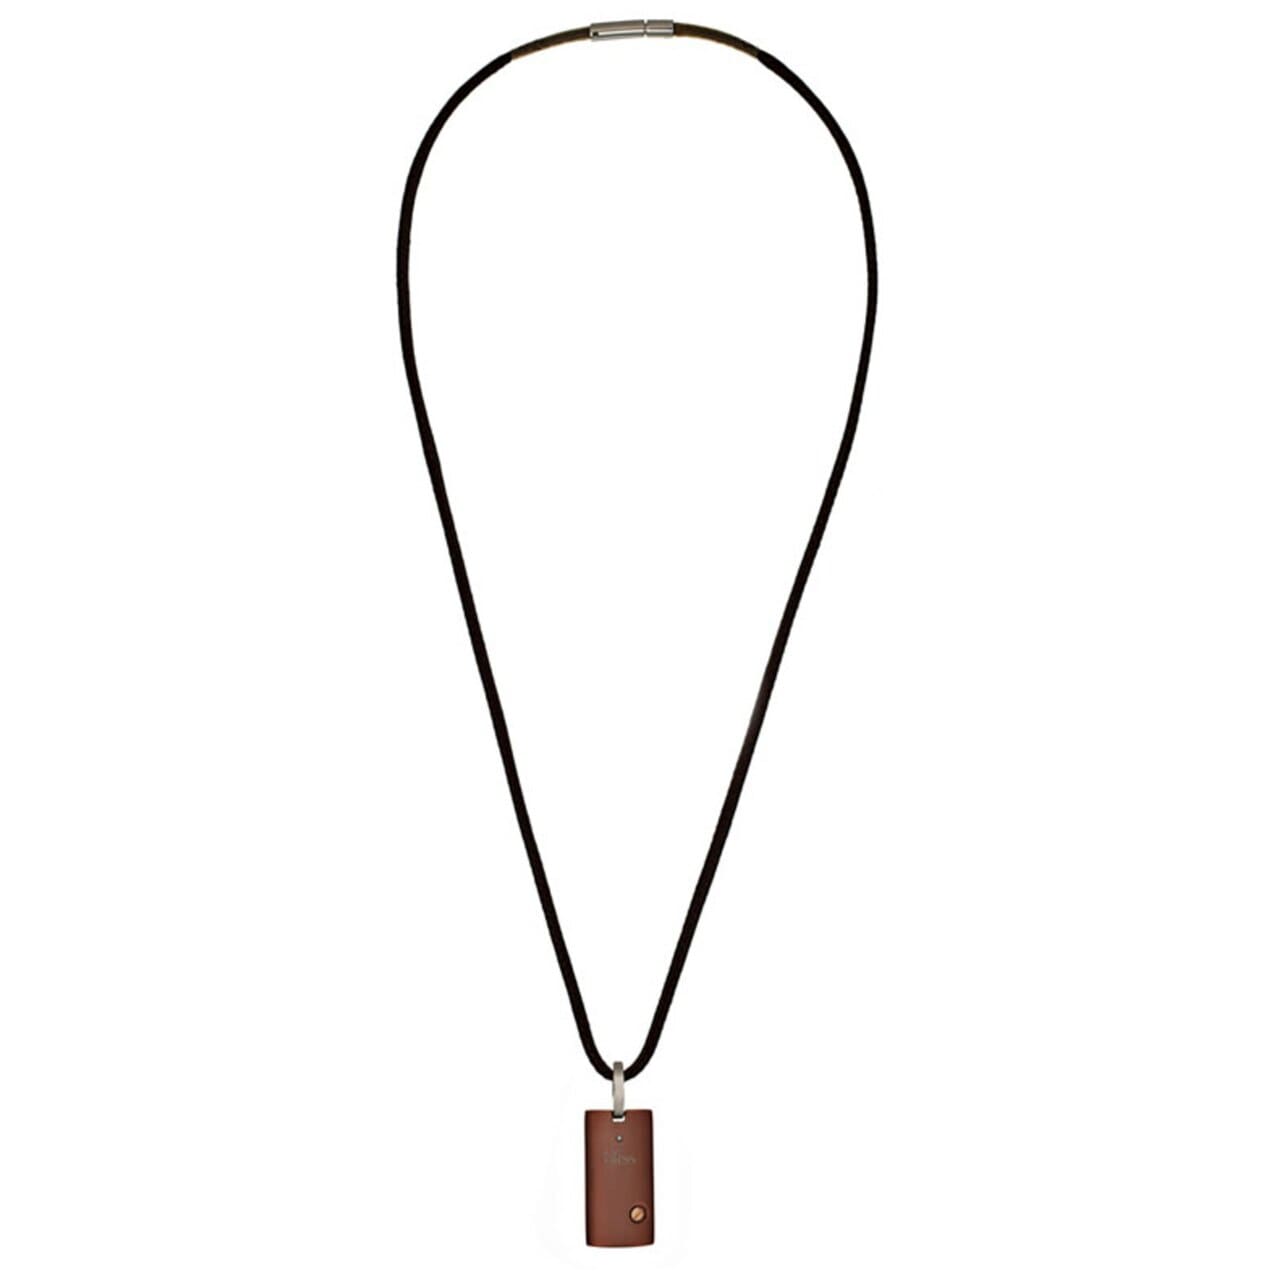 BLISS by Damiani "Uomo" Brown Stainless Steel & 18K Rose Gold Pendant w/Diamond Necklace 840771105487 20004786